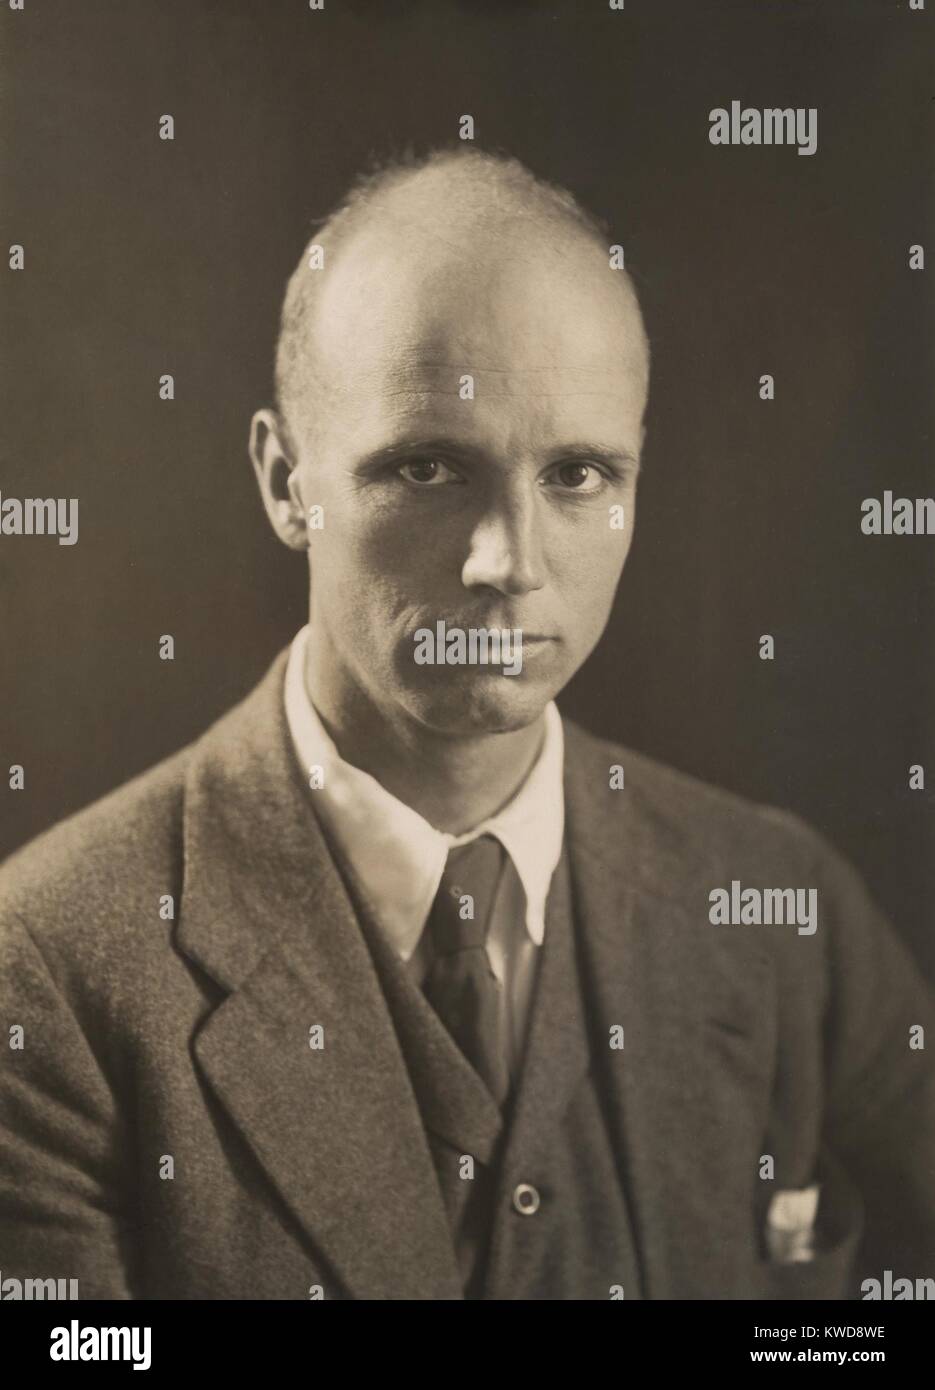 Rockwell Kent, American painter, illustrator and printmaker, c. 1920. He created stylized realist paintings of landscapes and figures, combining strong formal design with emotional themes. His leftist politics gained him notoriety during the 1950s 'Red Sc (BSLOC 2016 8 133) Stock Photo